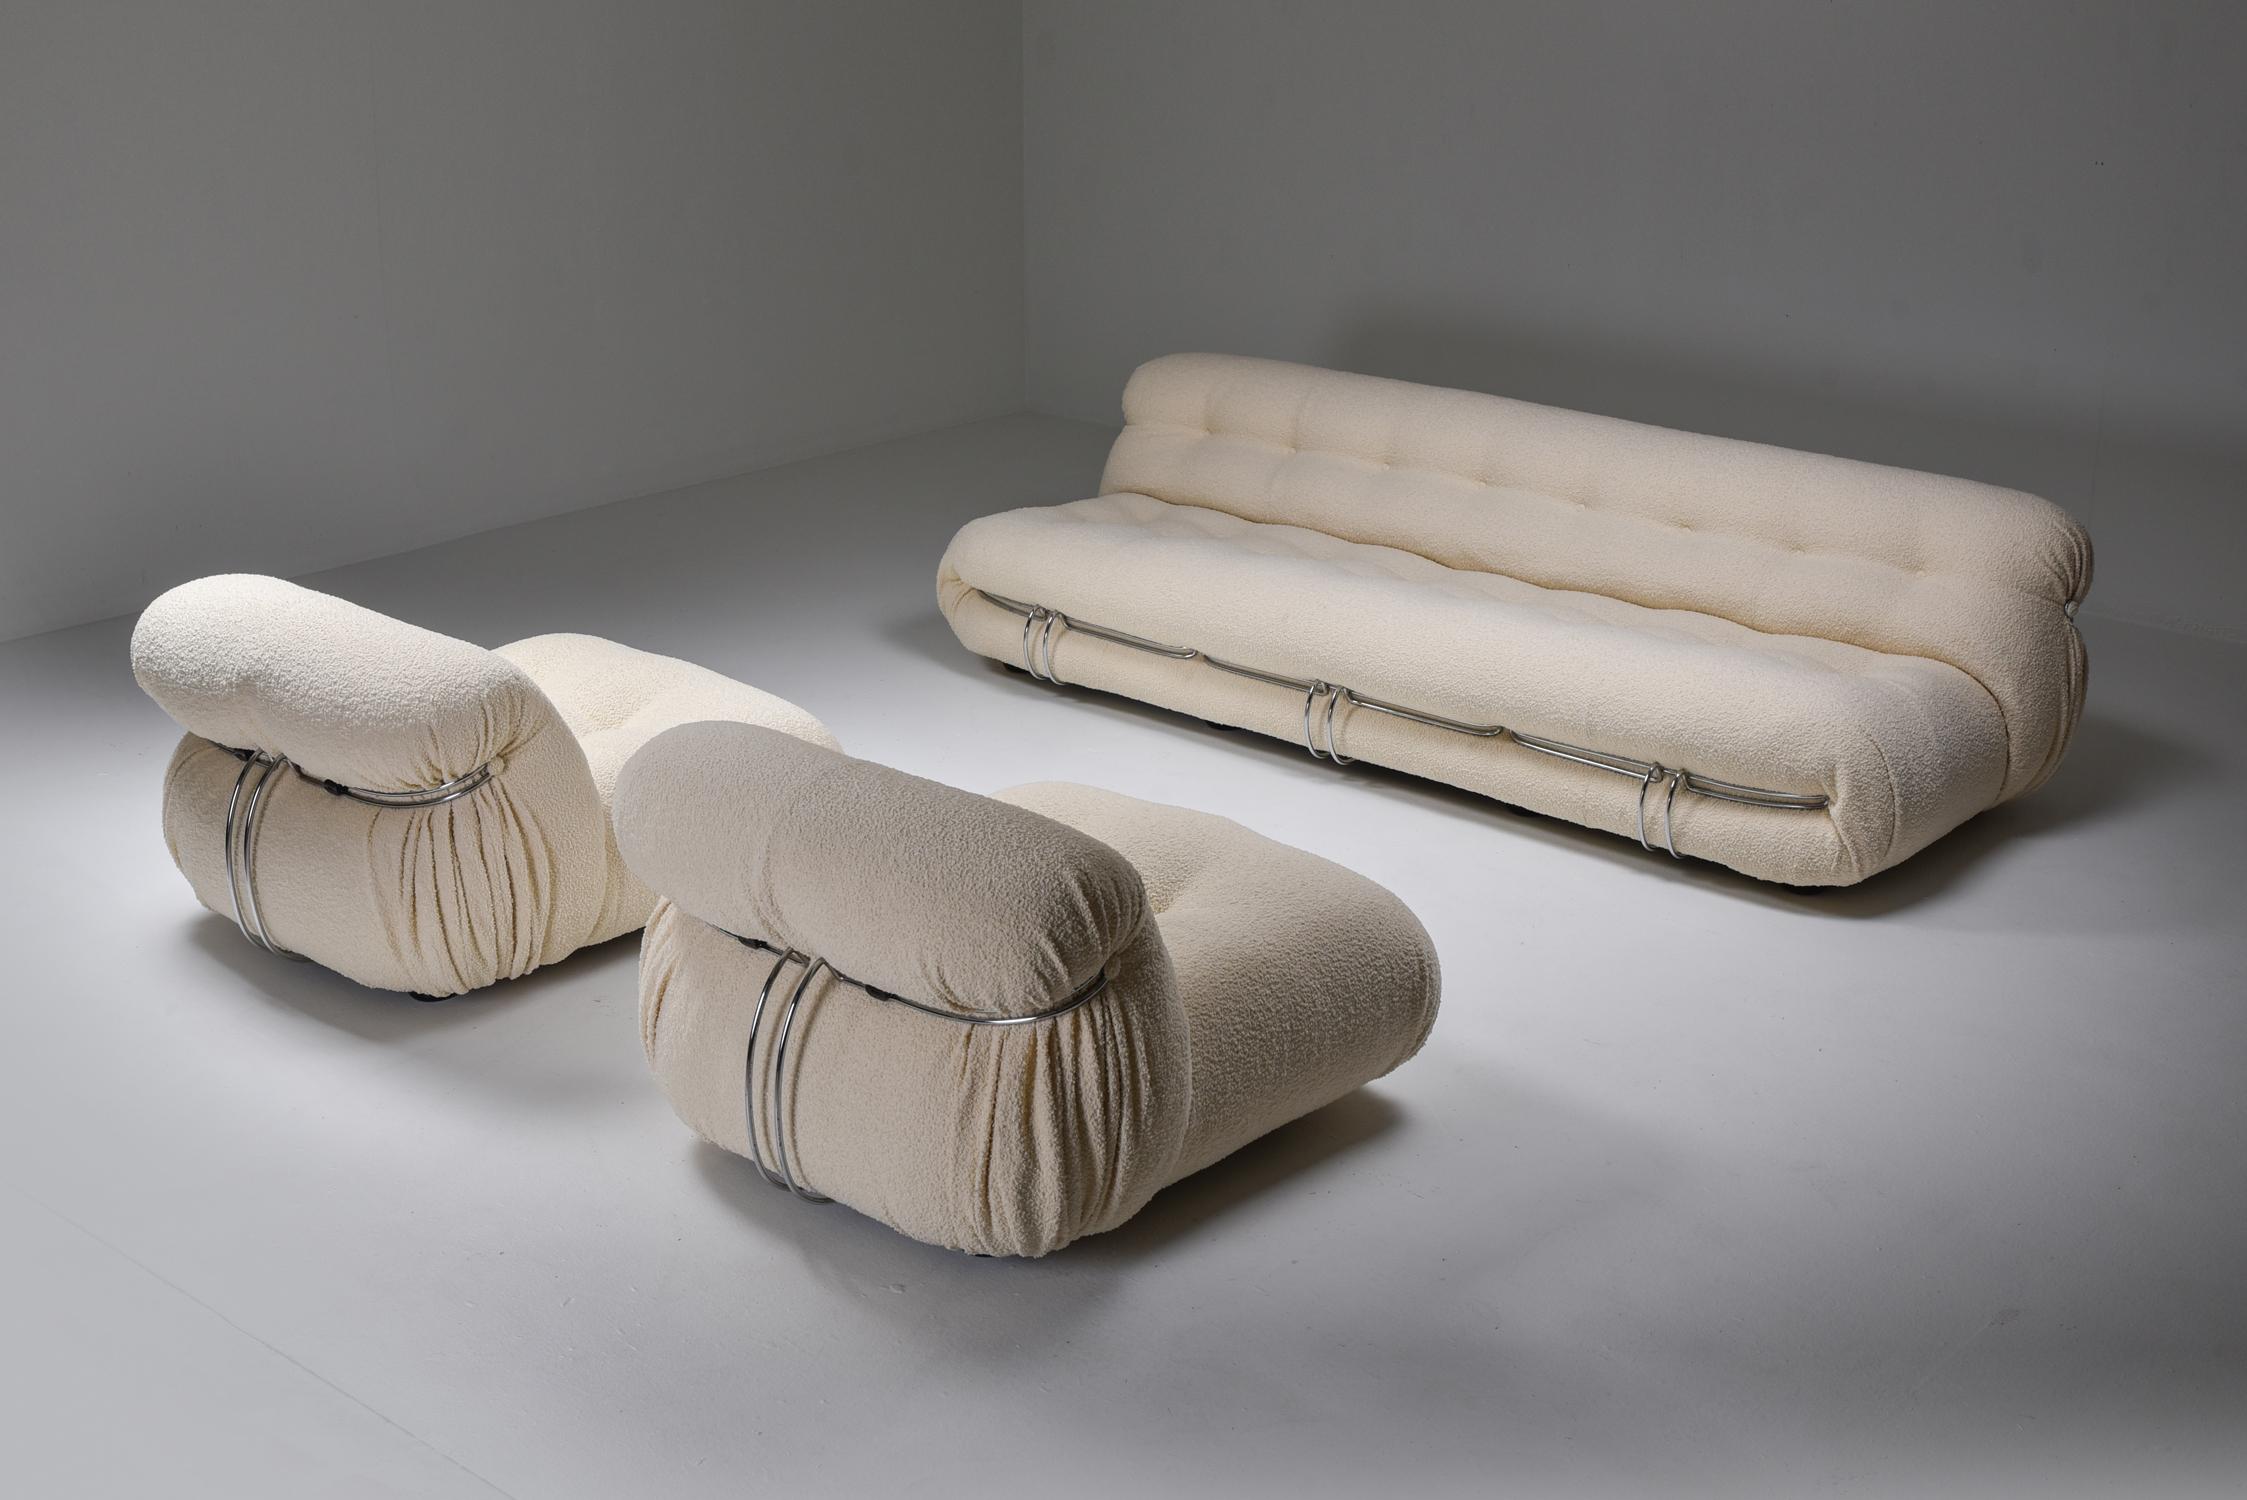 Cassina 'Soriana' Four-Seater Sofa by Afra and Tobia Scarpa in Bouclé, 1970's For Sale 1